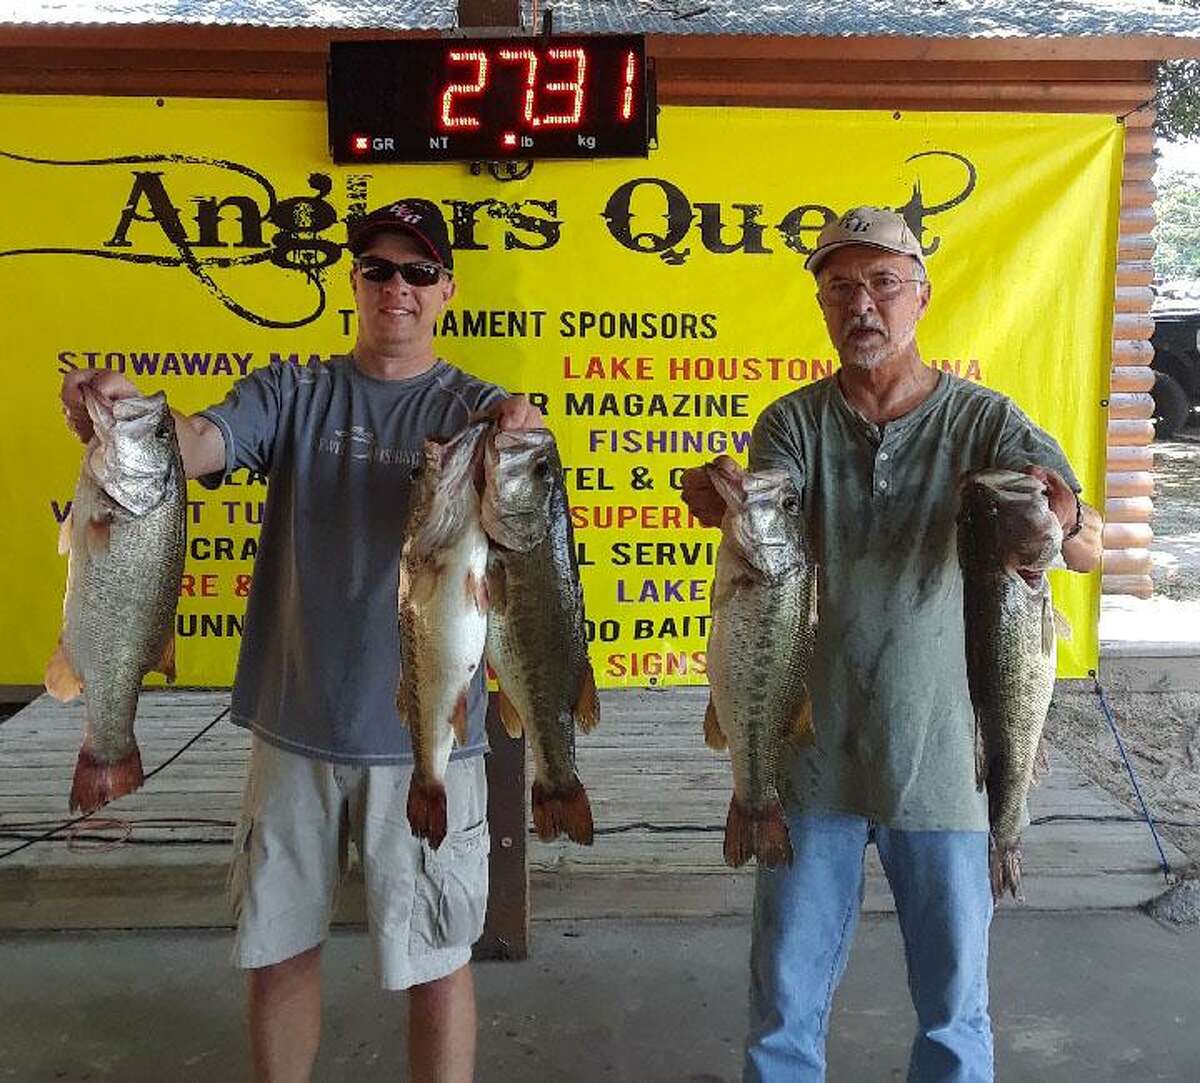 Brian and Chip Sewell came in second in the Anglers Quest Team Tournament #6 with a total stringer weight of 27.31 pounds.